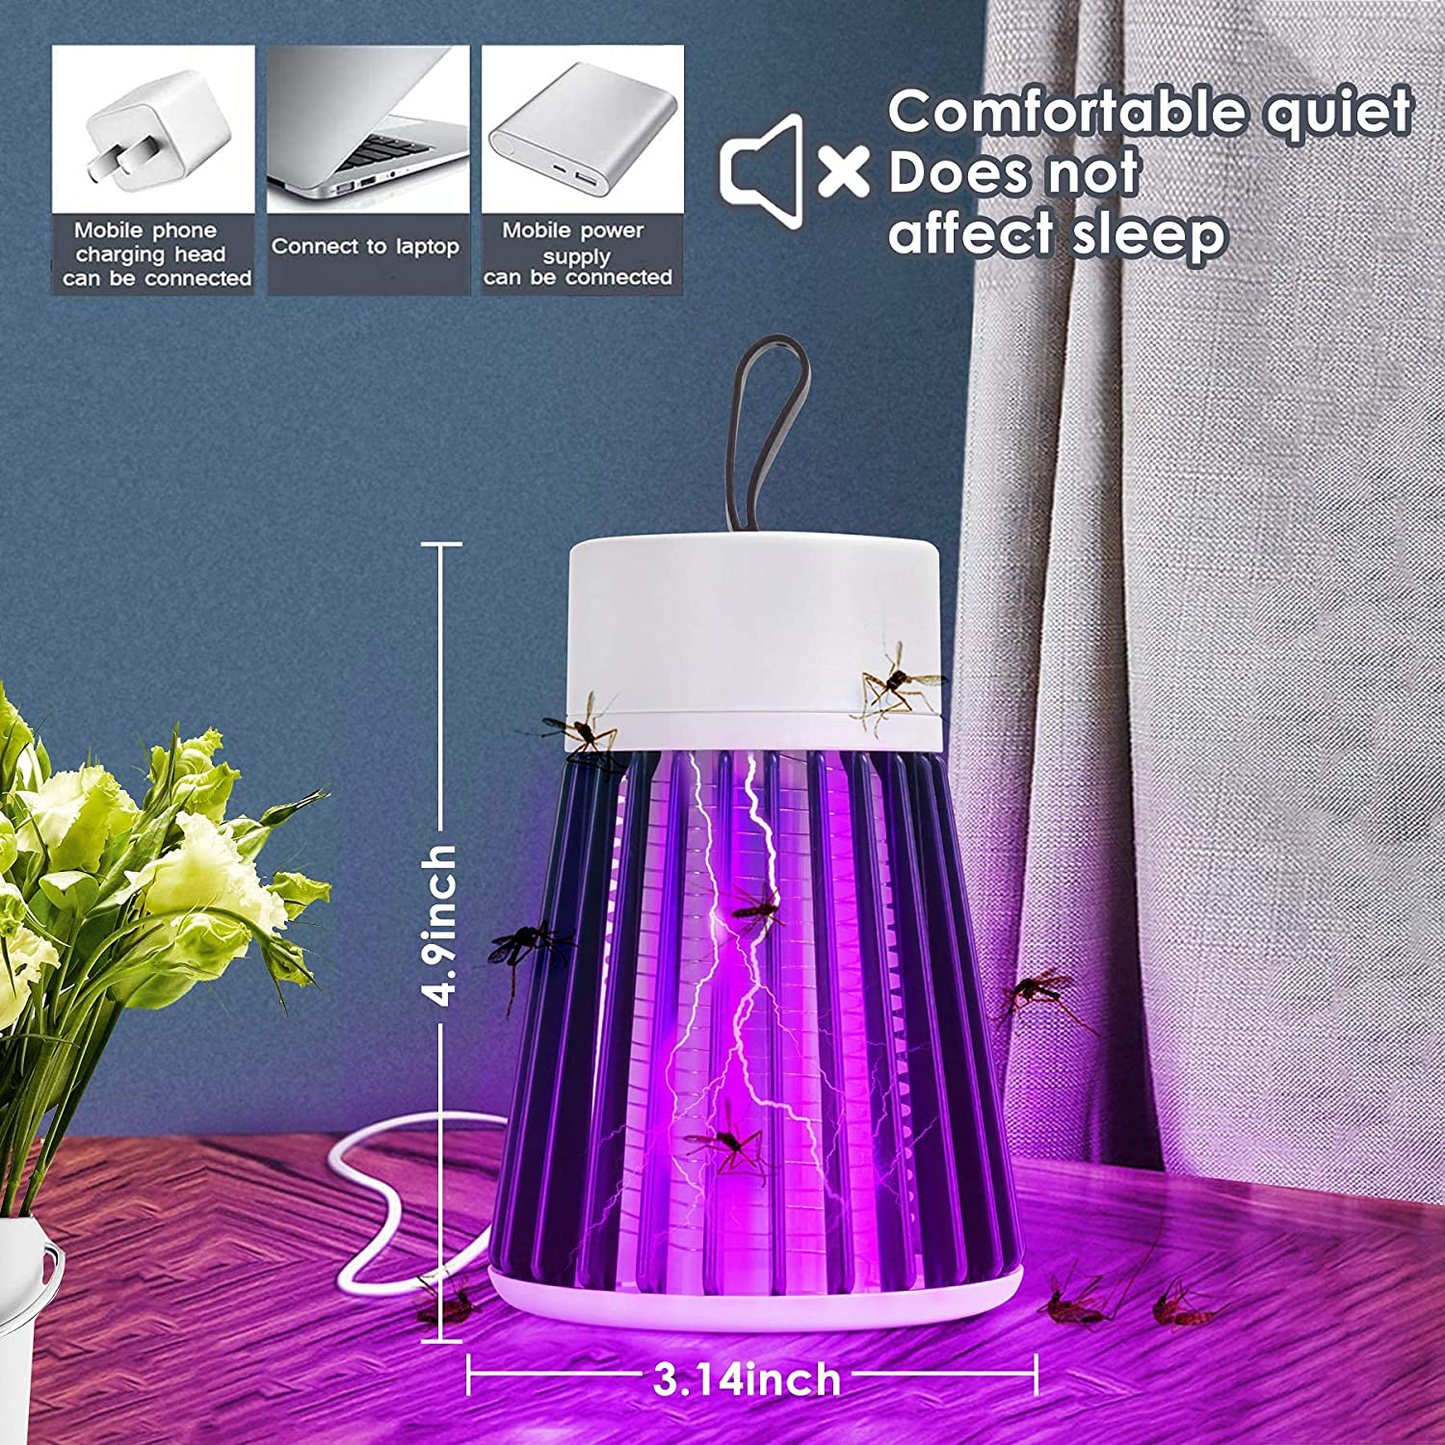 Bug Zapper Hangable Green Electric UV Insect Catcher & Killer for Flies,Fly Trap Lamp Mosquitoes,Gnats & Other Small to Large Flying Pests for Home, Kitchen,Garden,Patio,Camping & More(with Free Plug